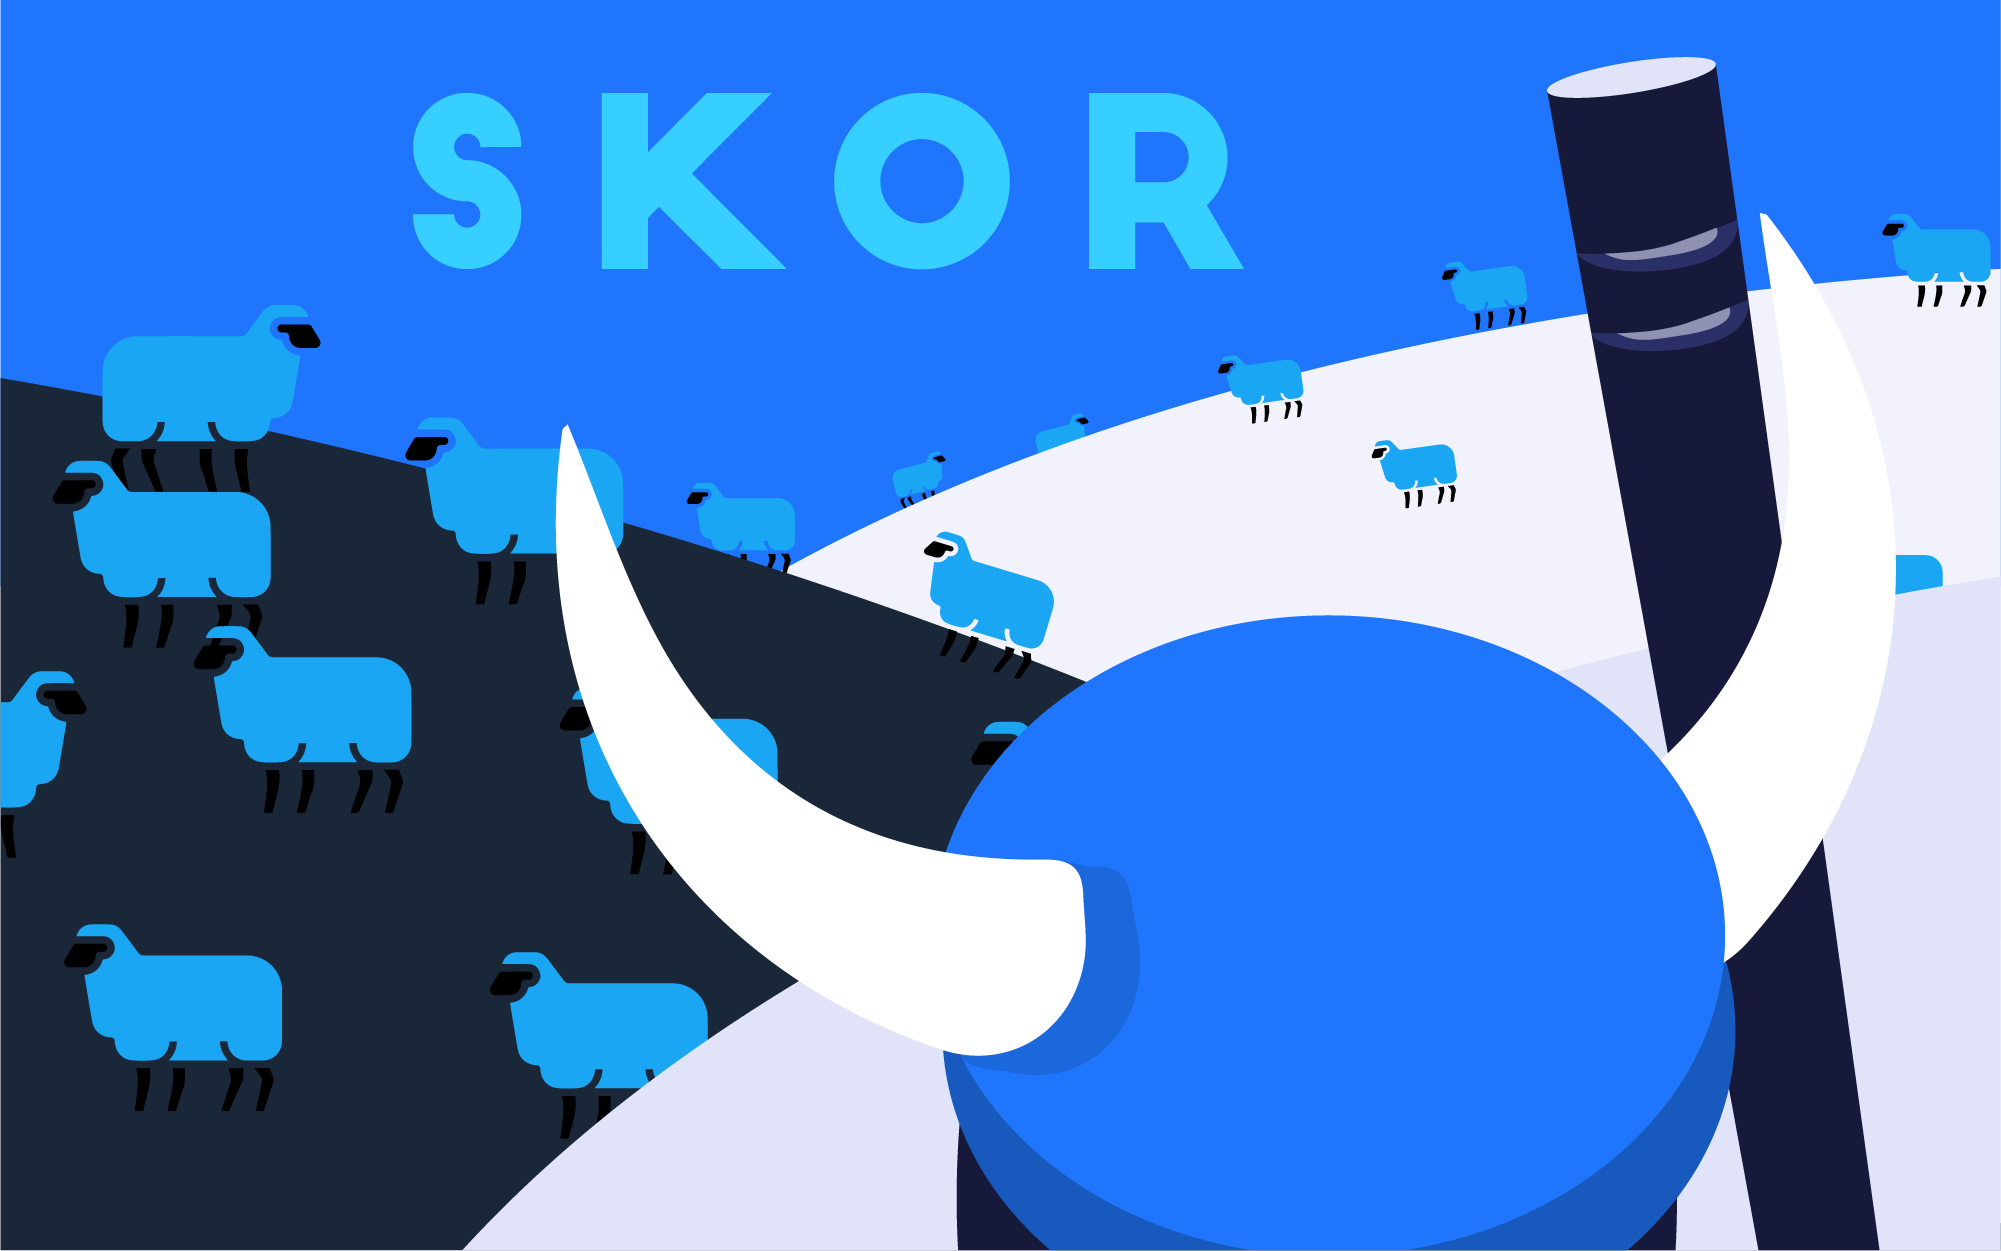 Illustration shows the word "SKOR" with a horned helmet, a stick and pastures with sheep. 